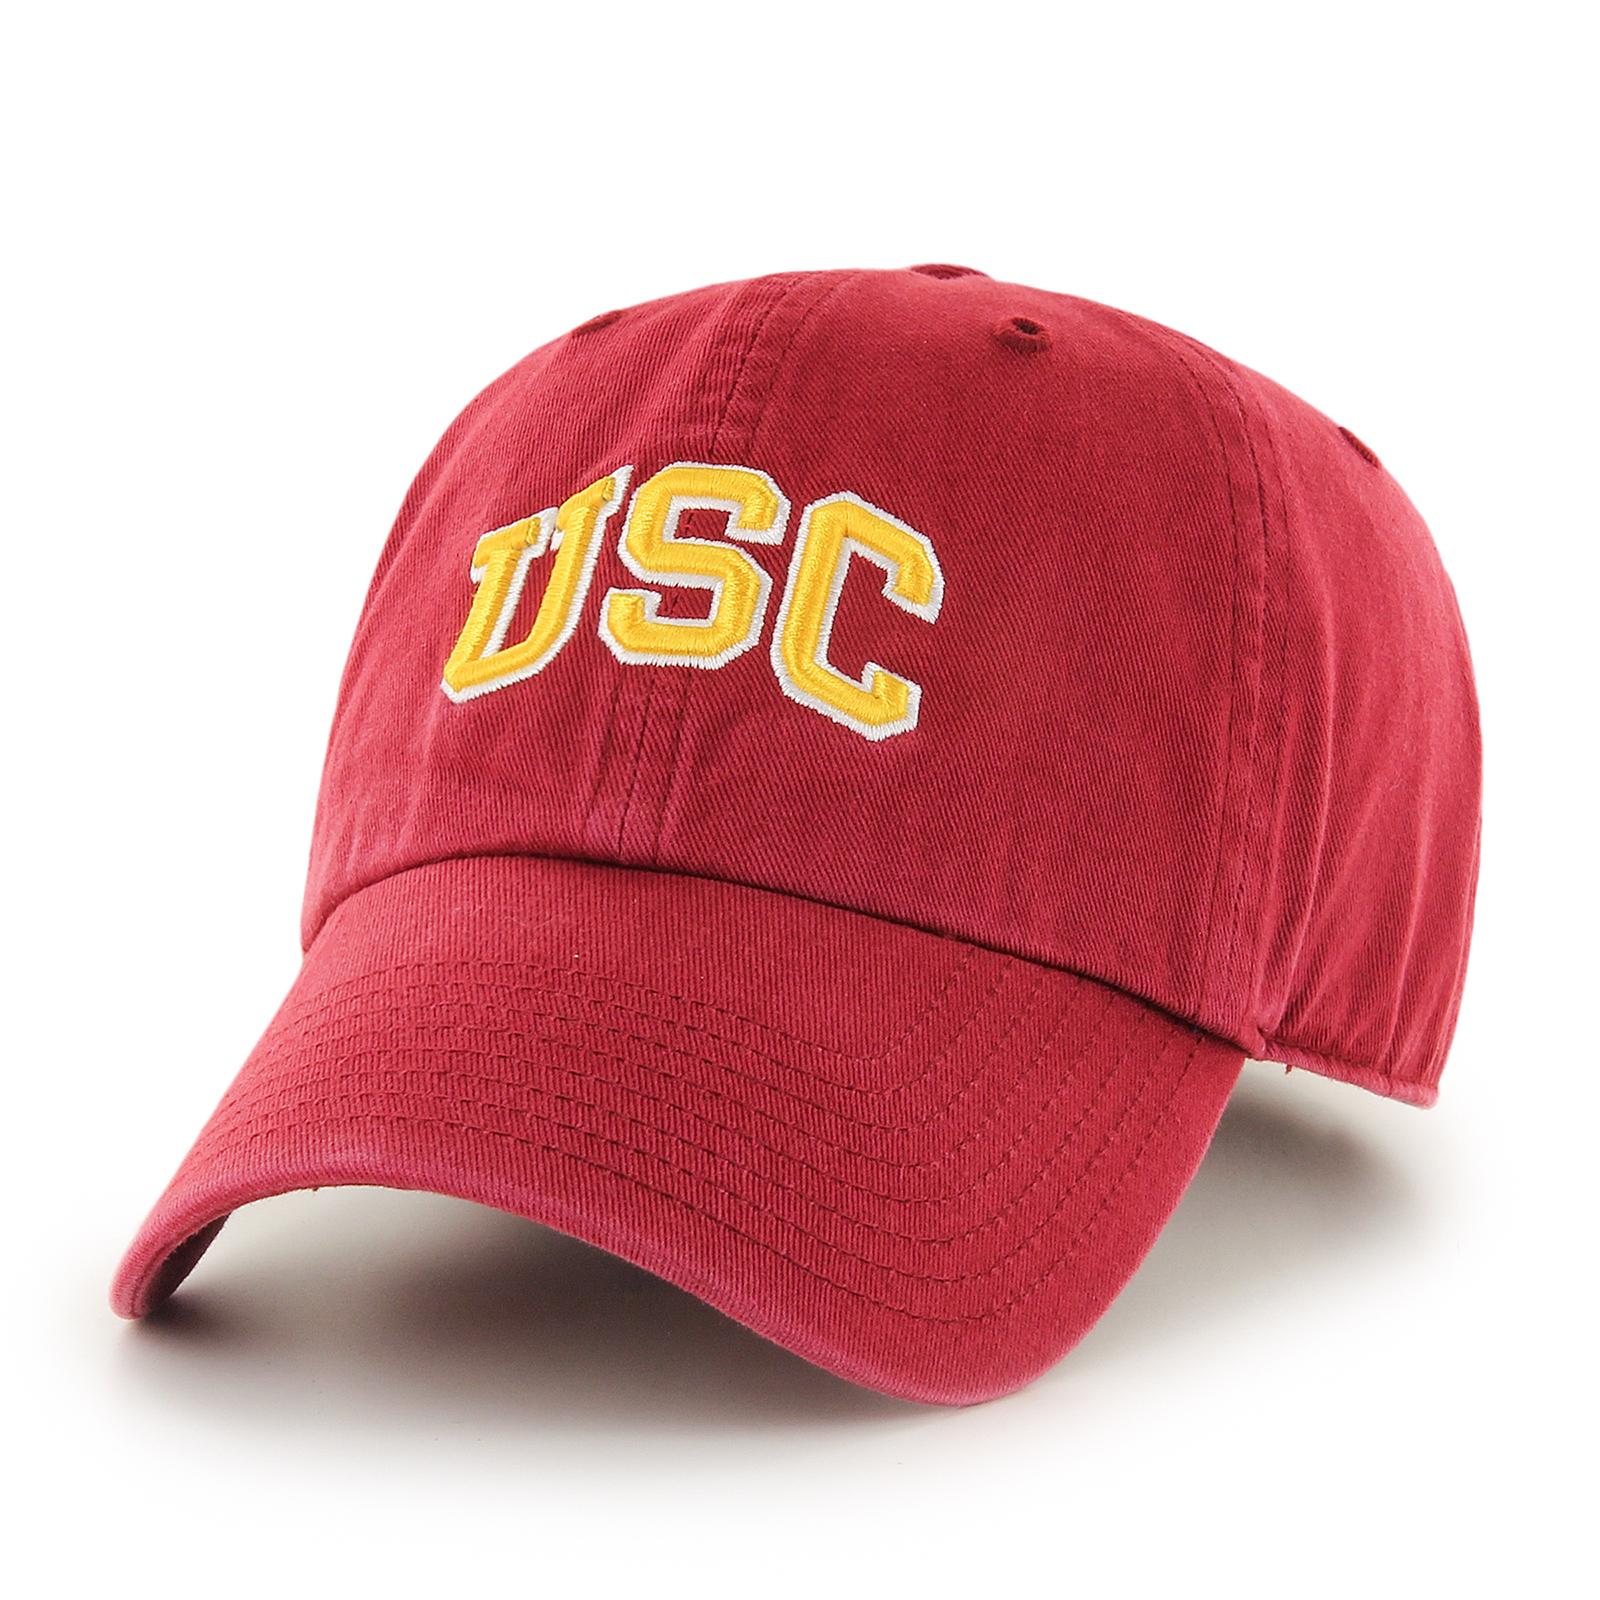 USC Arch Mens Clean Up Hat image21